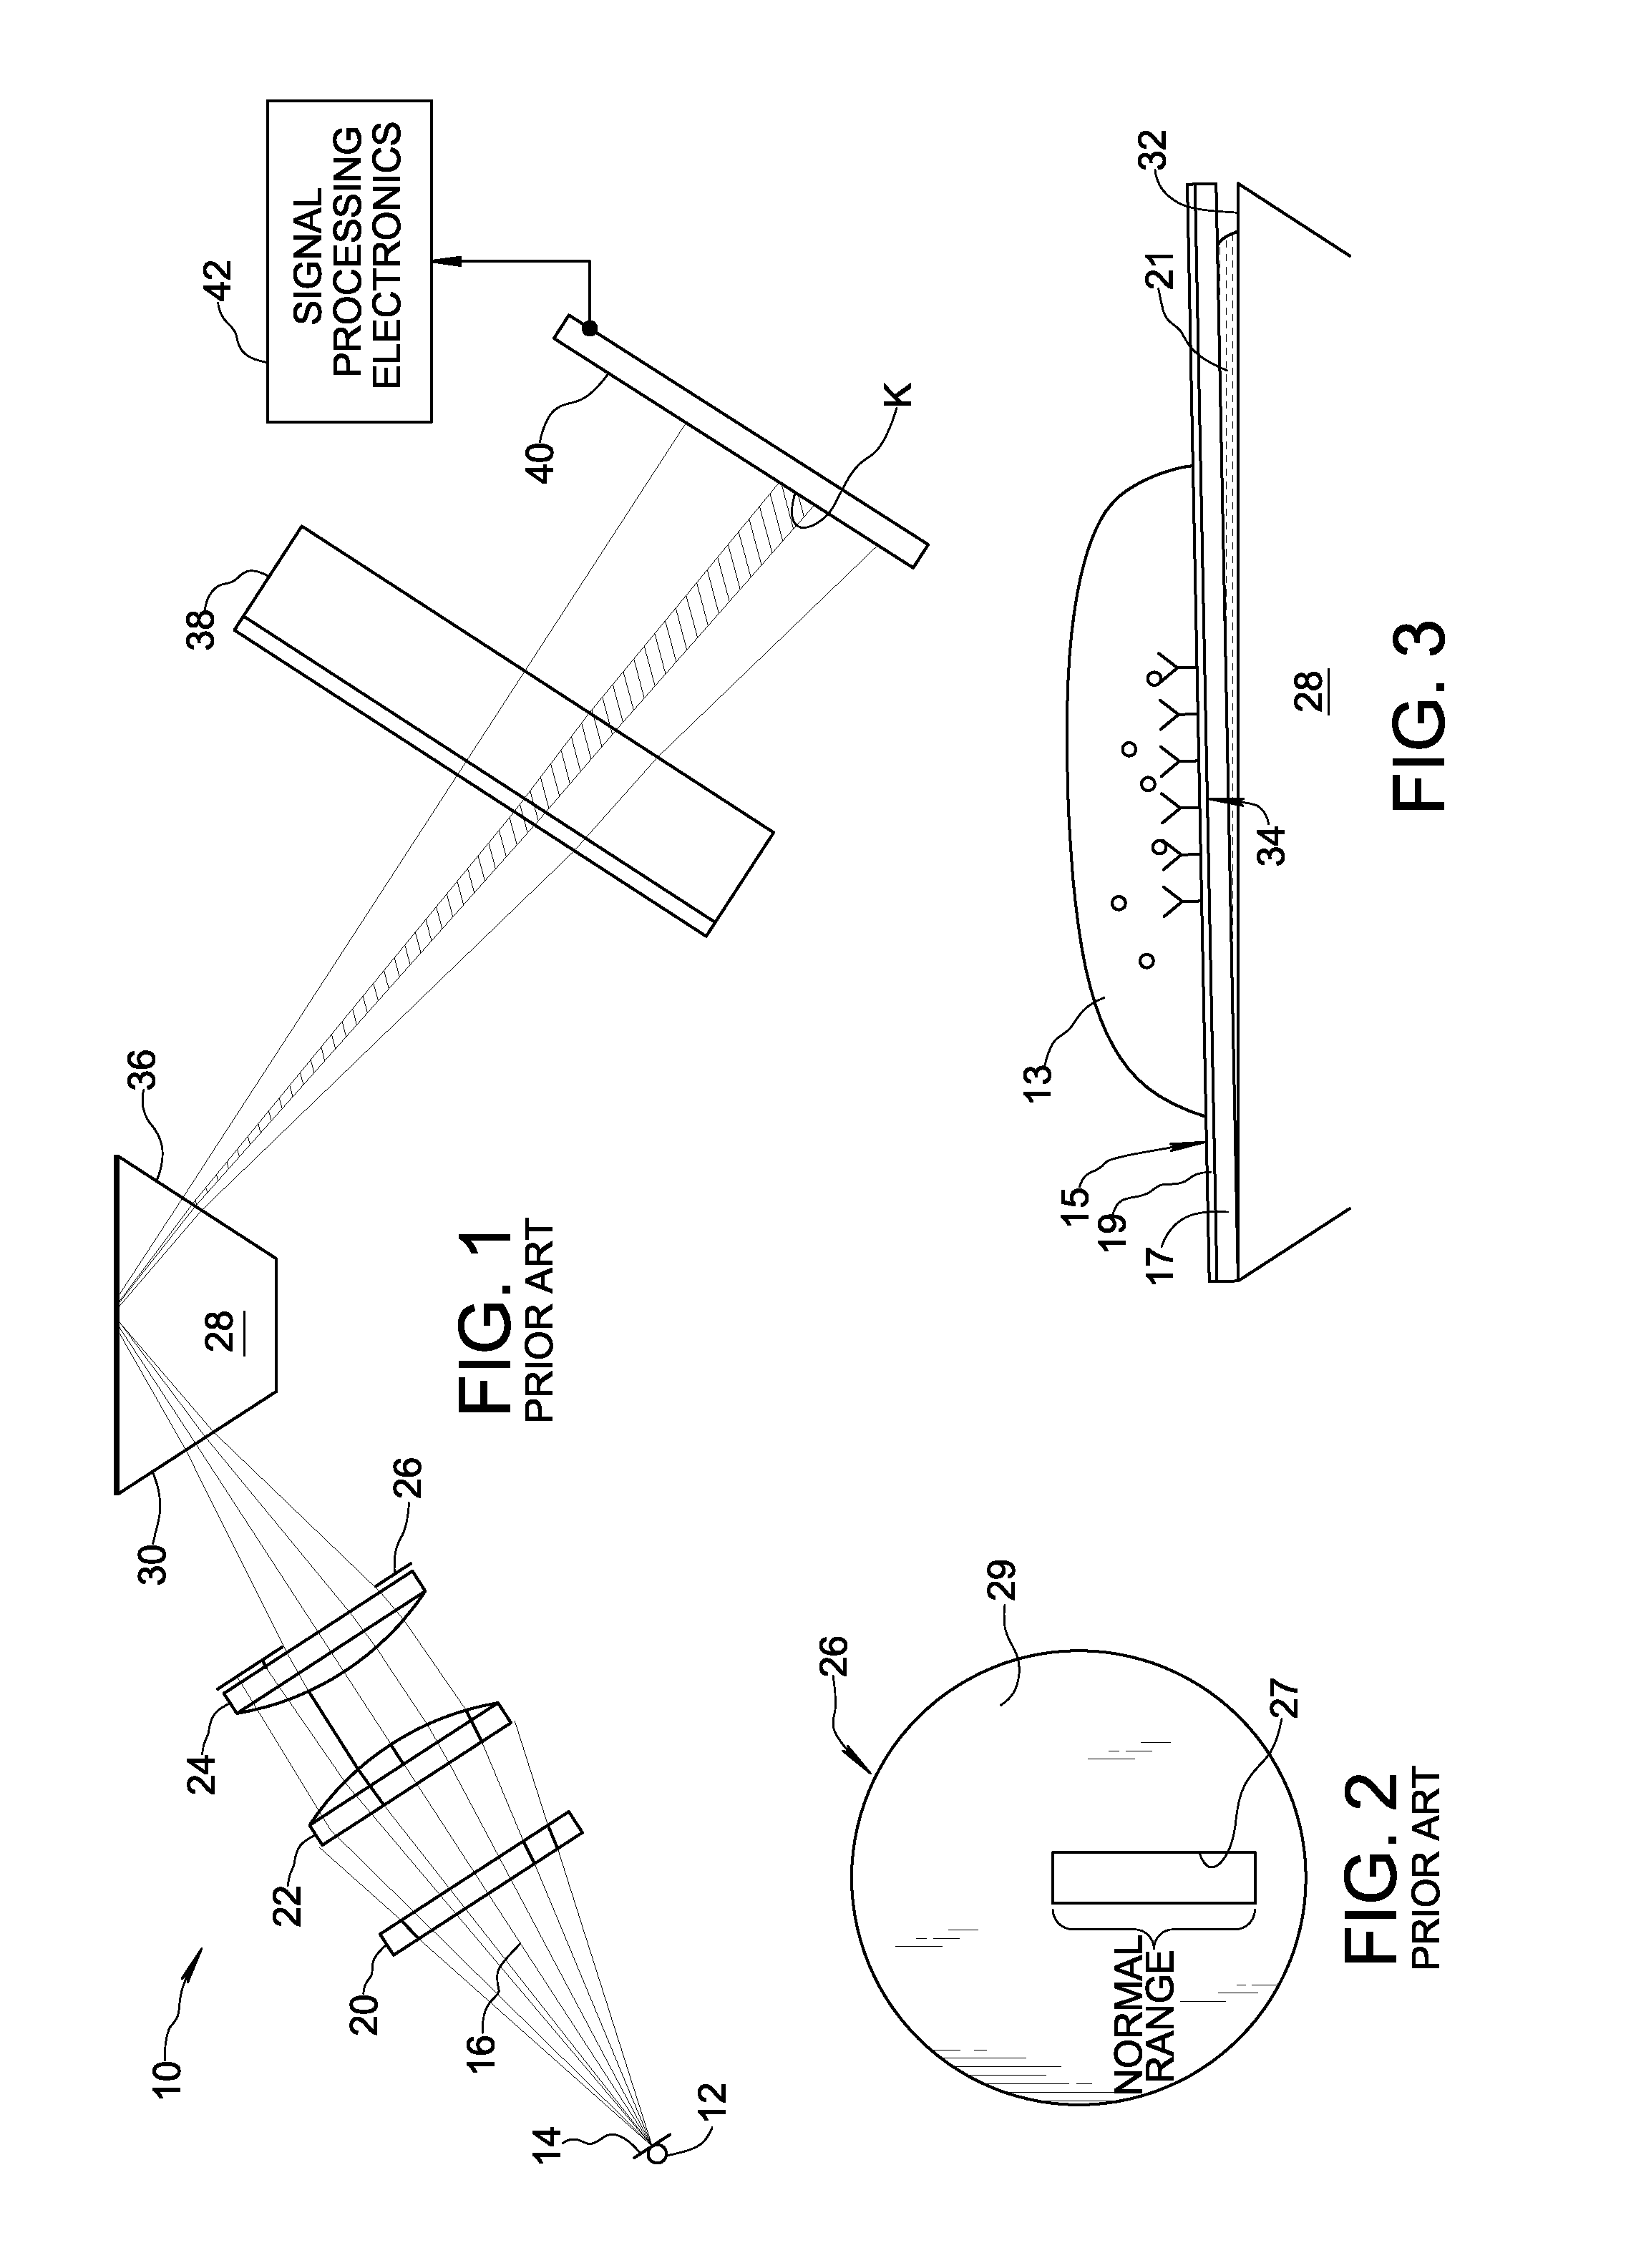 Analytical Instrument Having Internal Reference Channel